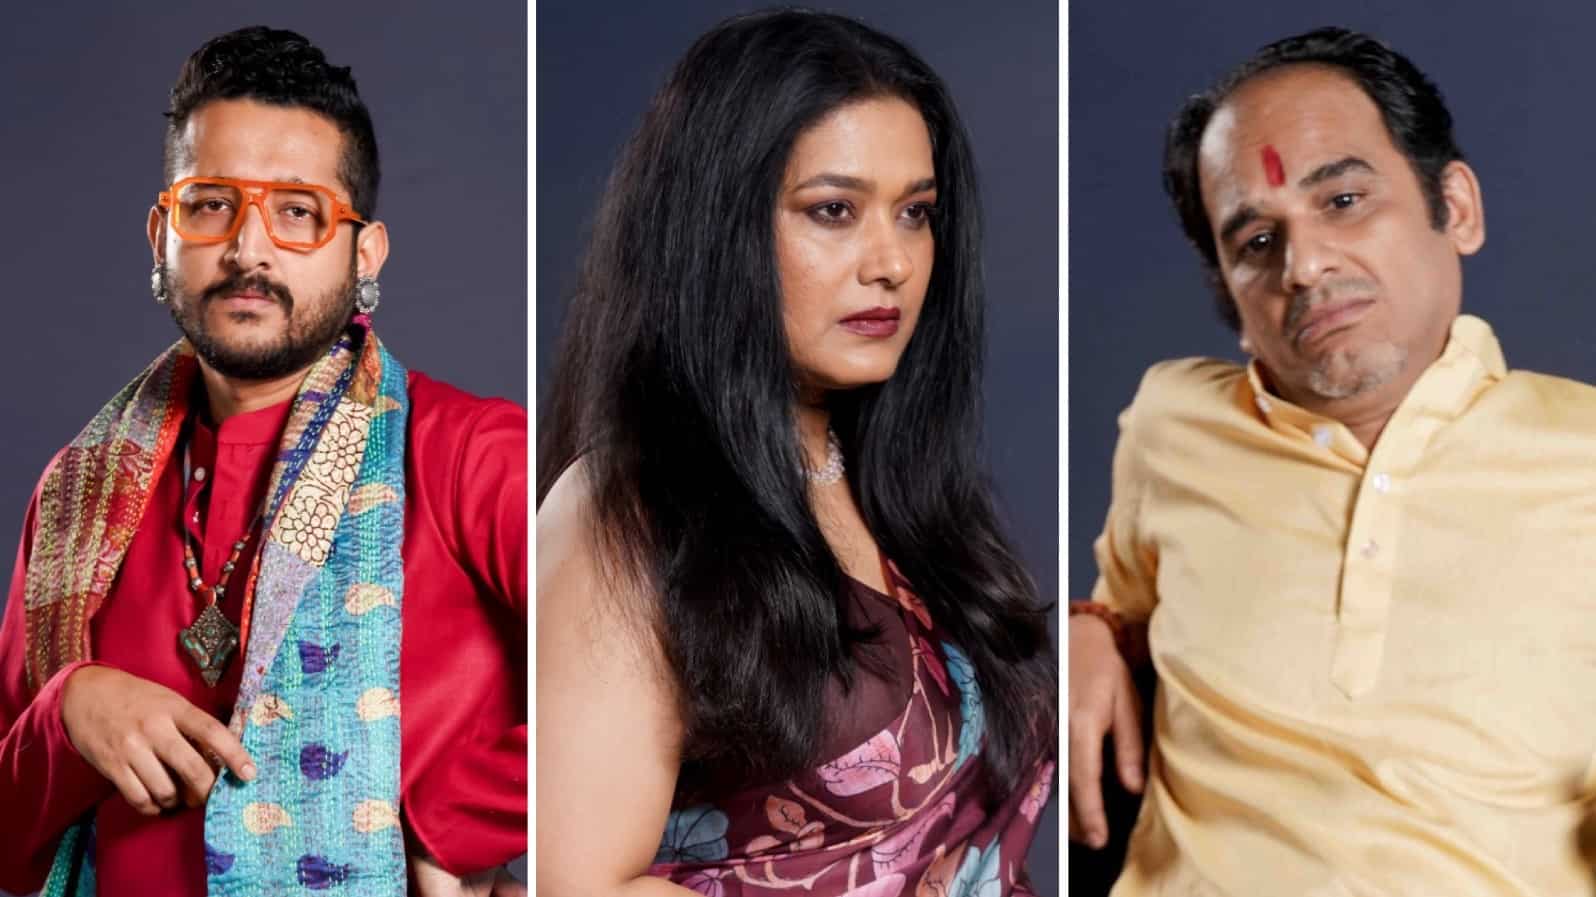 https://www.mobilemasala.com/film-gossip/Nothings-Real-Check-Out-The-Look-Revel-Of-Parambrata-Chatterjee-Ritvik-Chakraborty-And-Others-i275988